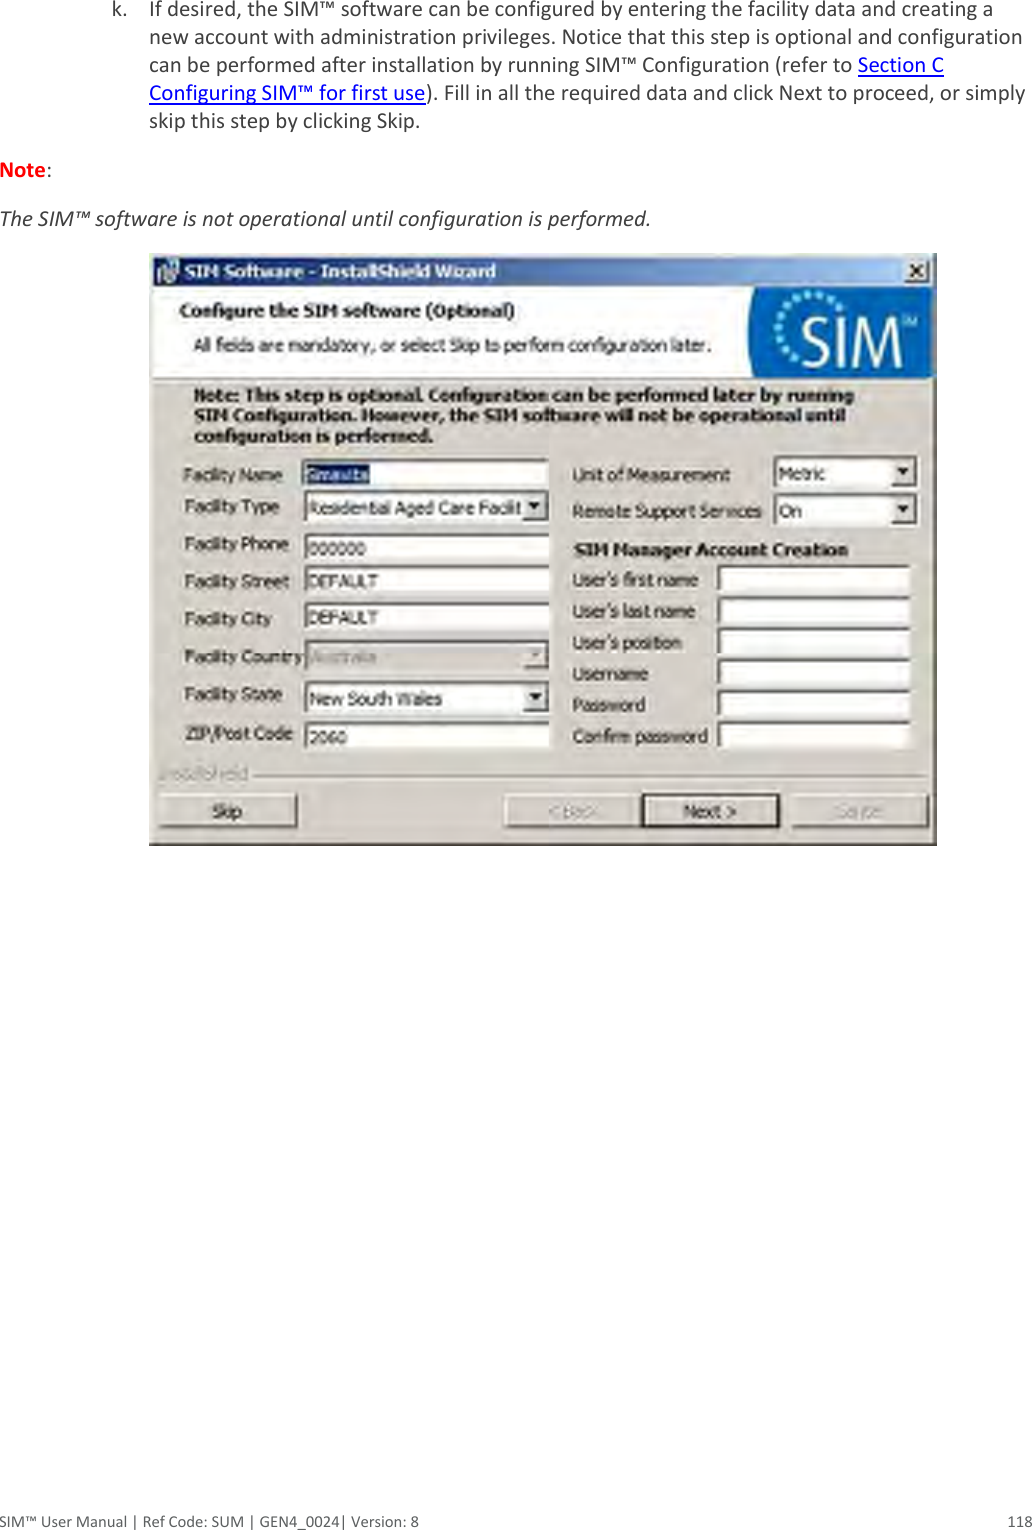  SIM™ User Manual | Ref Code: SUM | GEN4_0024| Version: 8  118  k. If desired, the SIM™ software can be configured by entering the facility data and creating a new account with administration privileges. Notice that this step is optional and configuration can be performed after installation by running SIM™ Configuration (refer to Section C Configuring SIM™ for first use). Fill in all the required data and click Next to proceed, or simply skip this step by clicking Skip.  Note:  The SIM™ software is not operational until configuration is performed.      